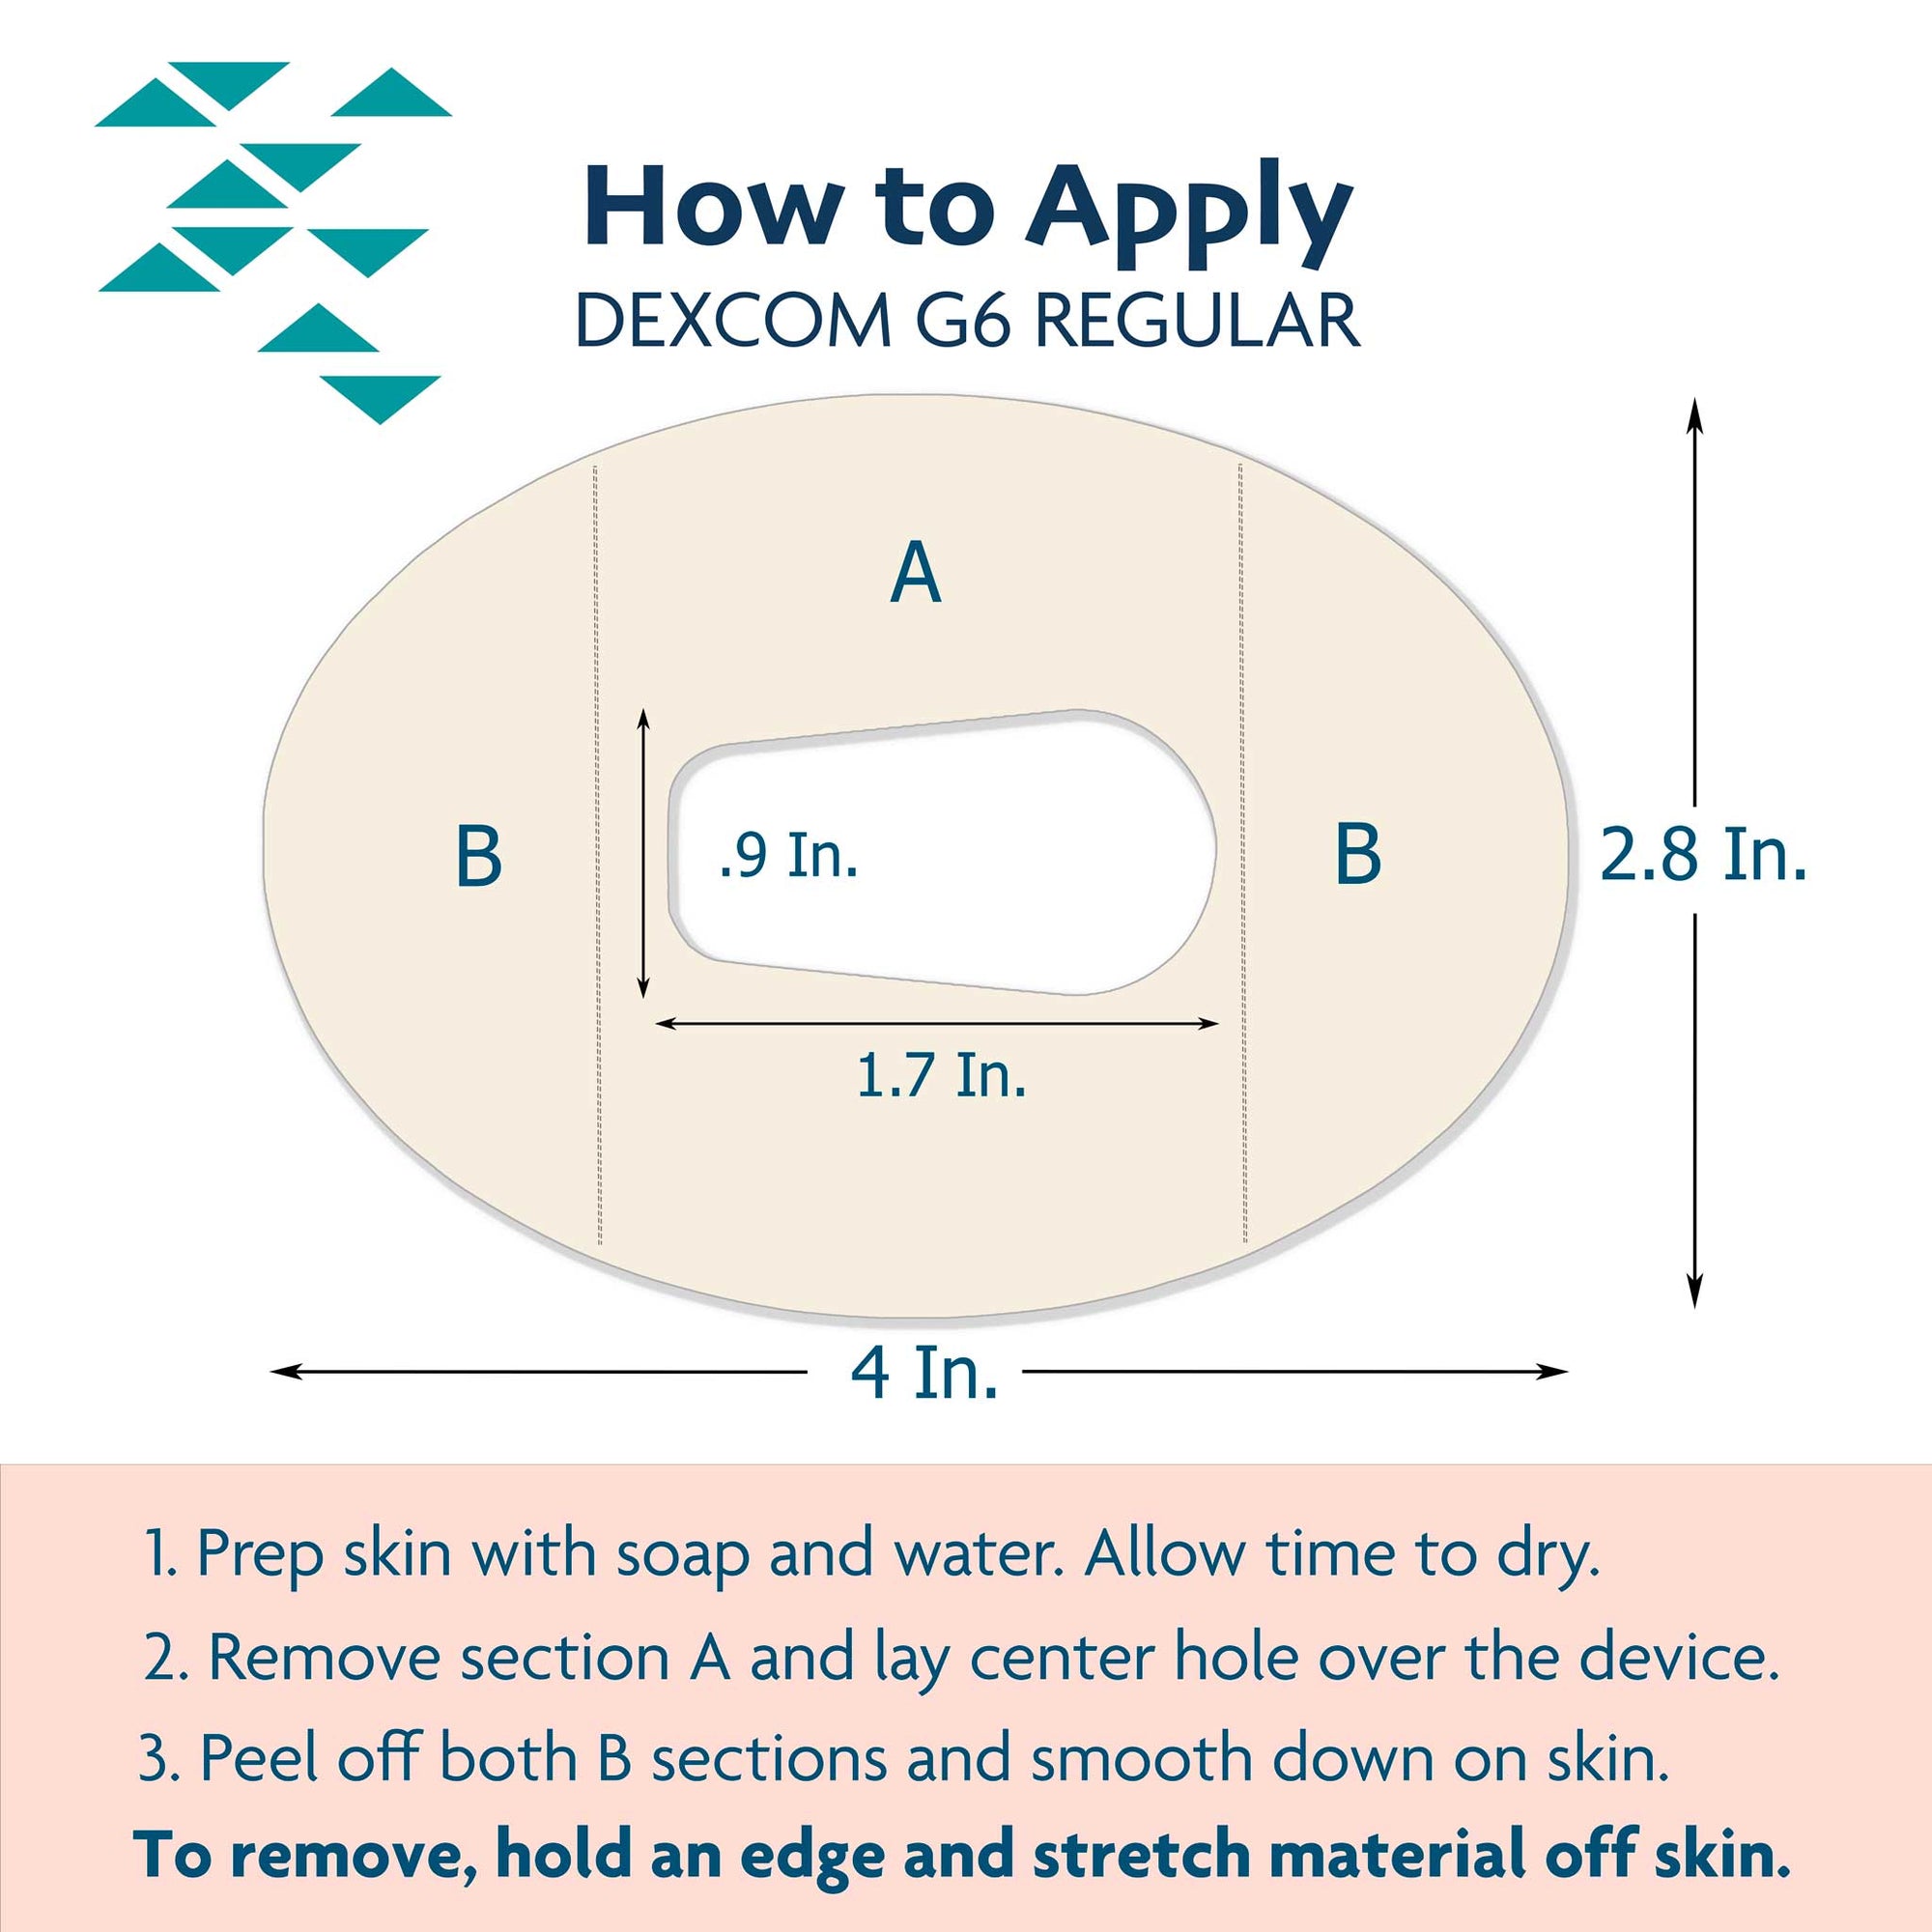 ExpressionMed Dexcom G6 Tapes proper application guide